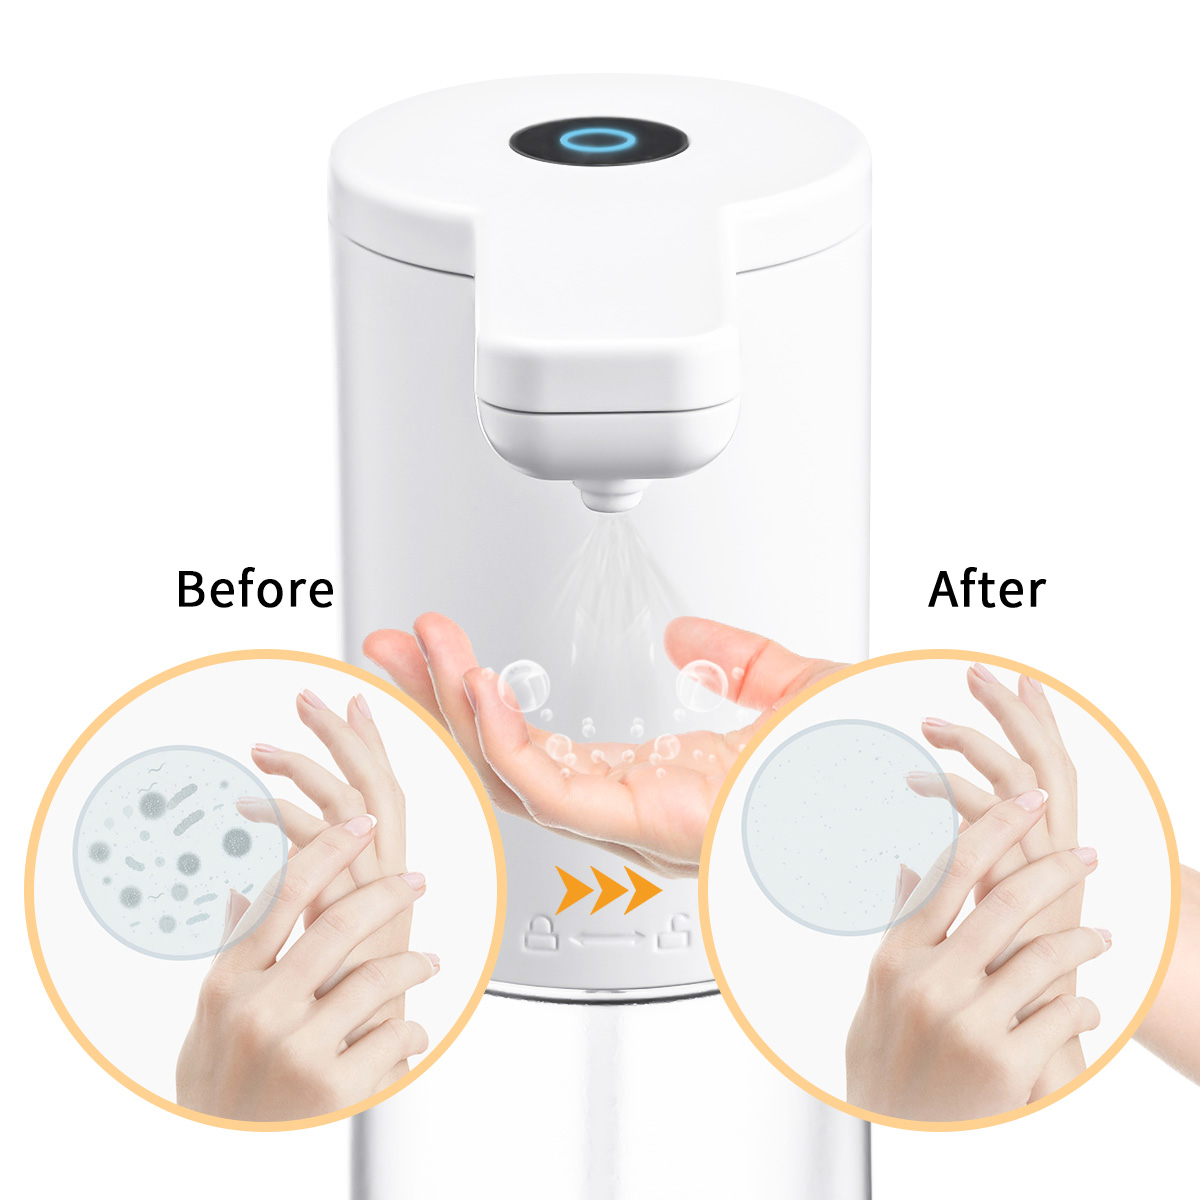 KING-DO-WAY-280ml-Automatic-Contactless-Soap-Dispenser-280ml-Smart-Touchless-Soap-Disinfectant-Dispe-1890640-6